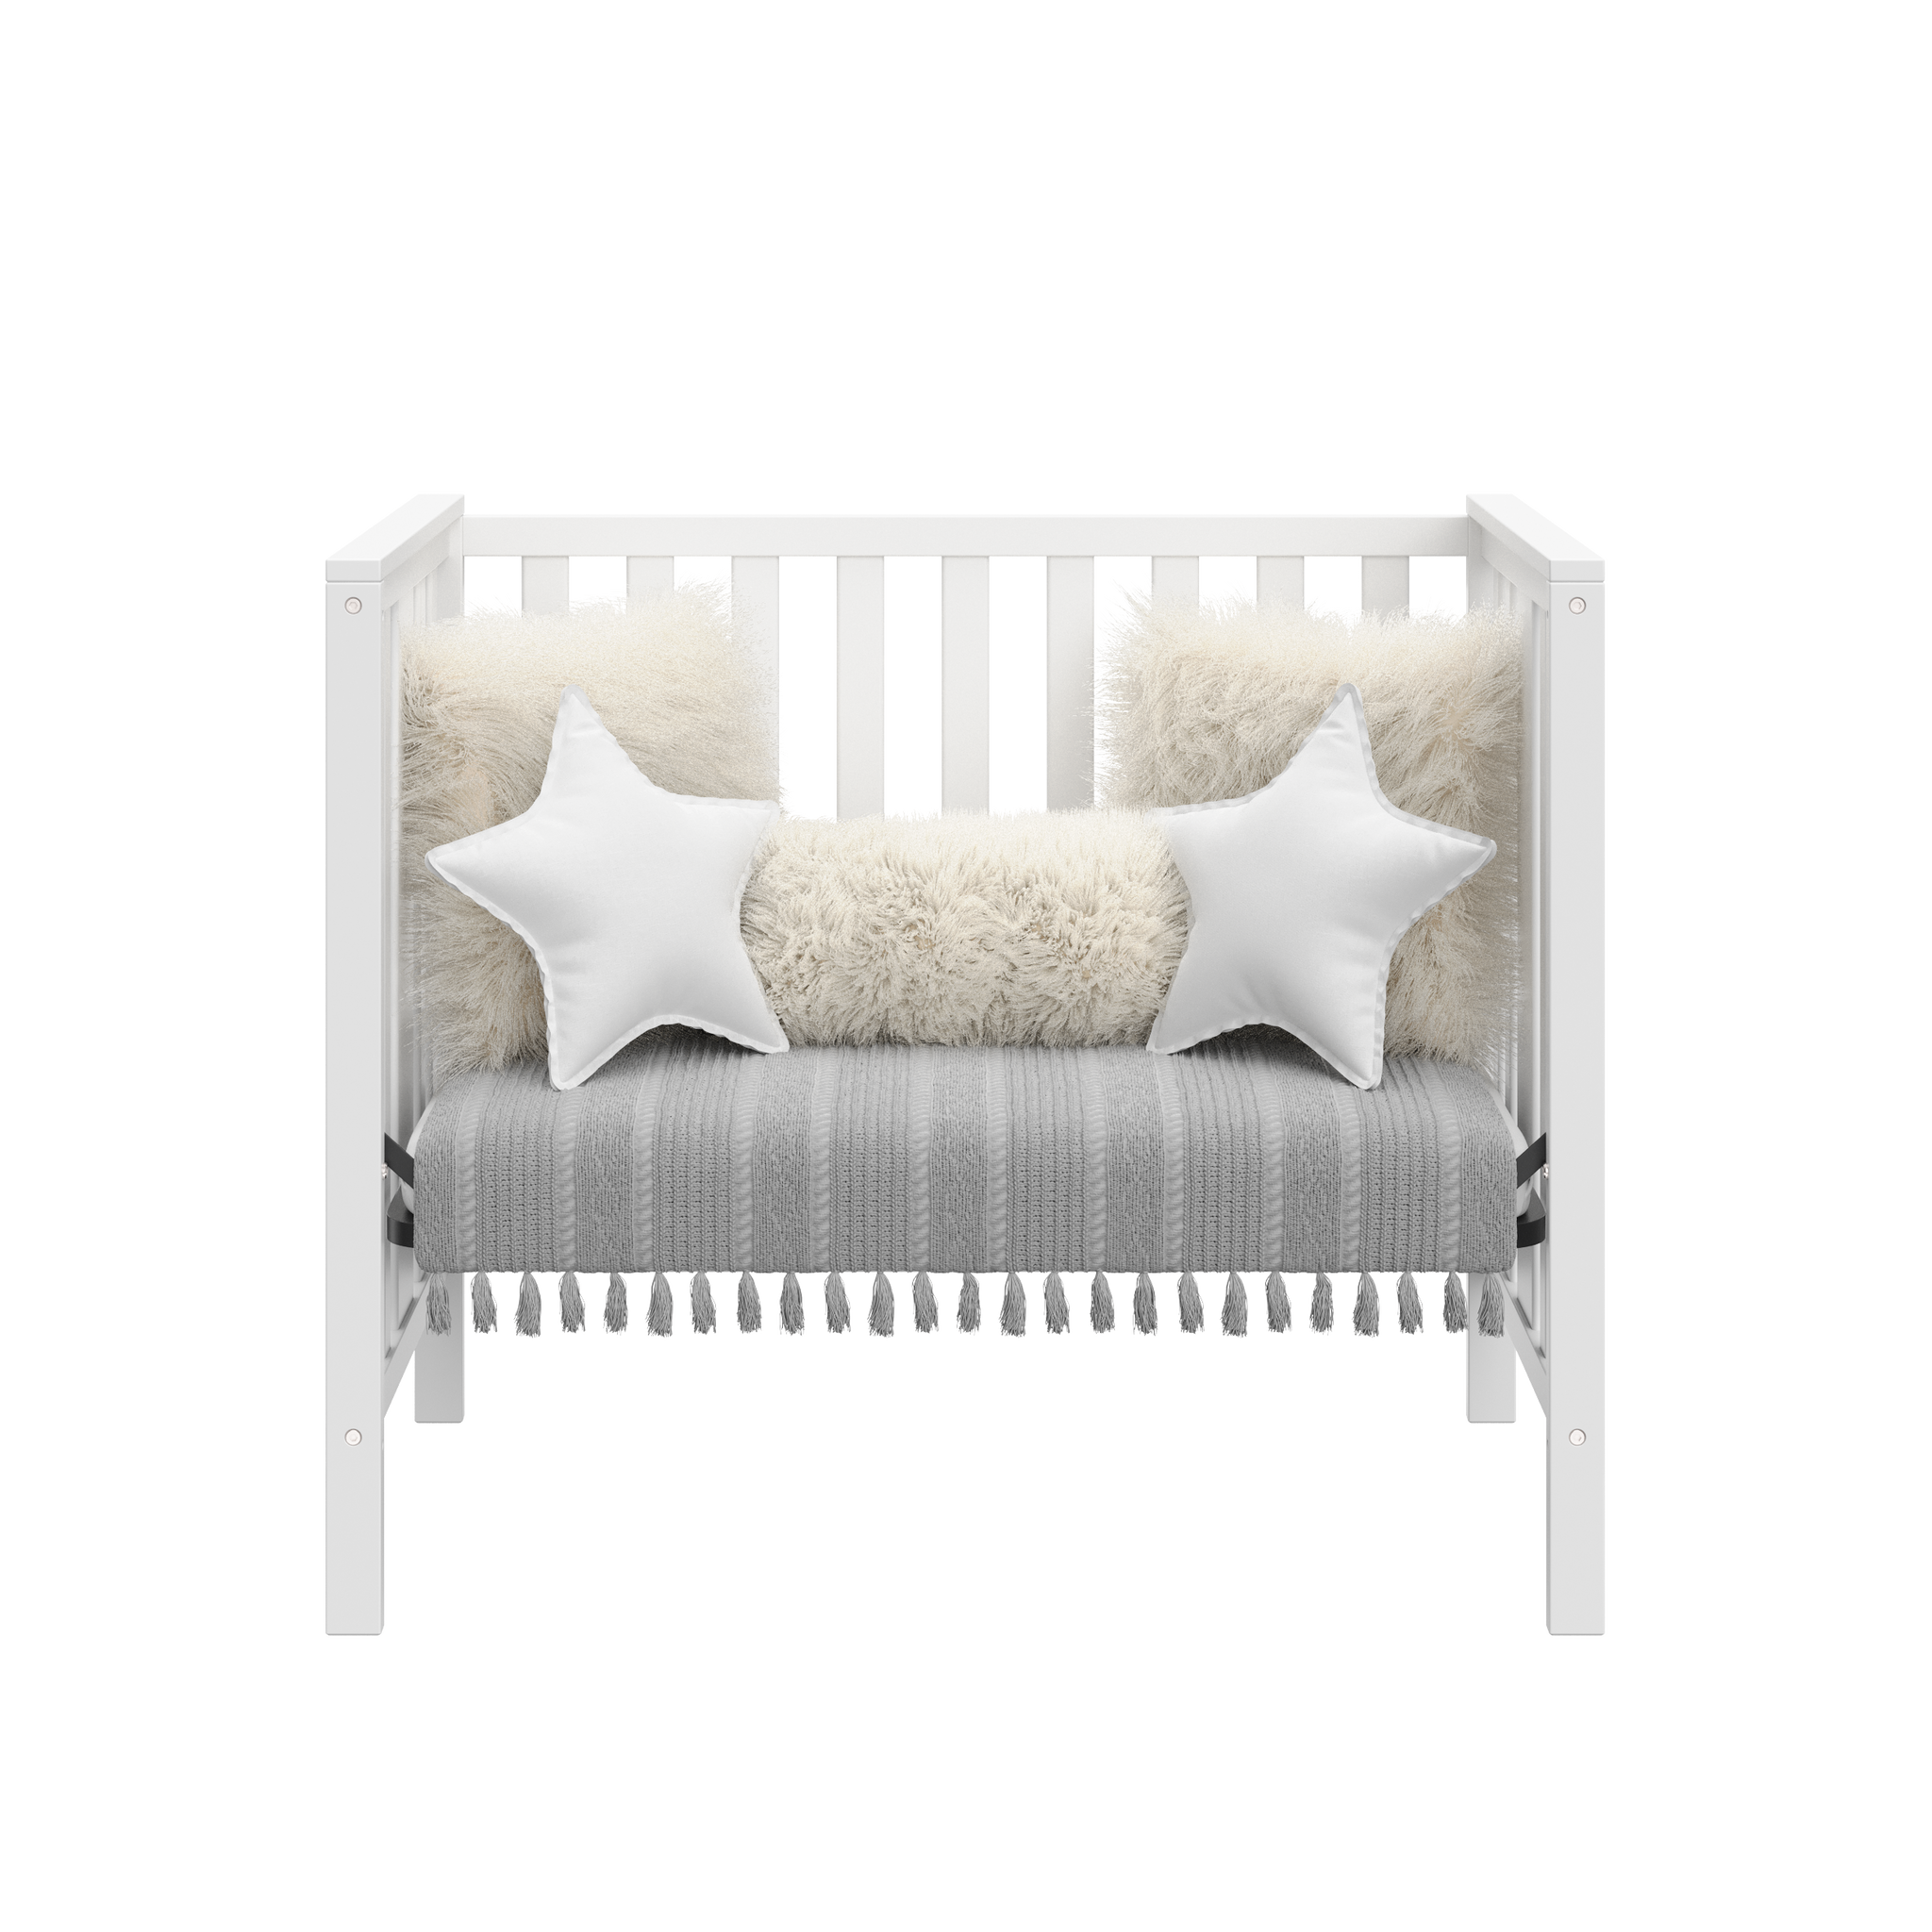 white crib in daybed conversion